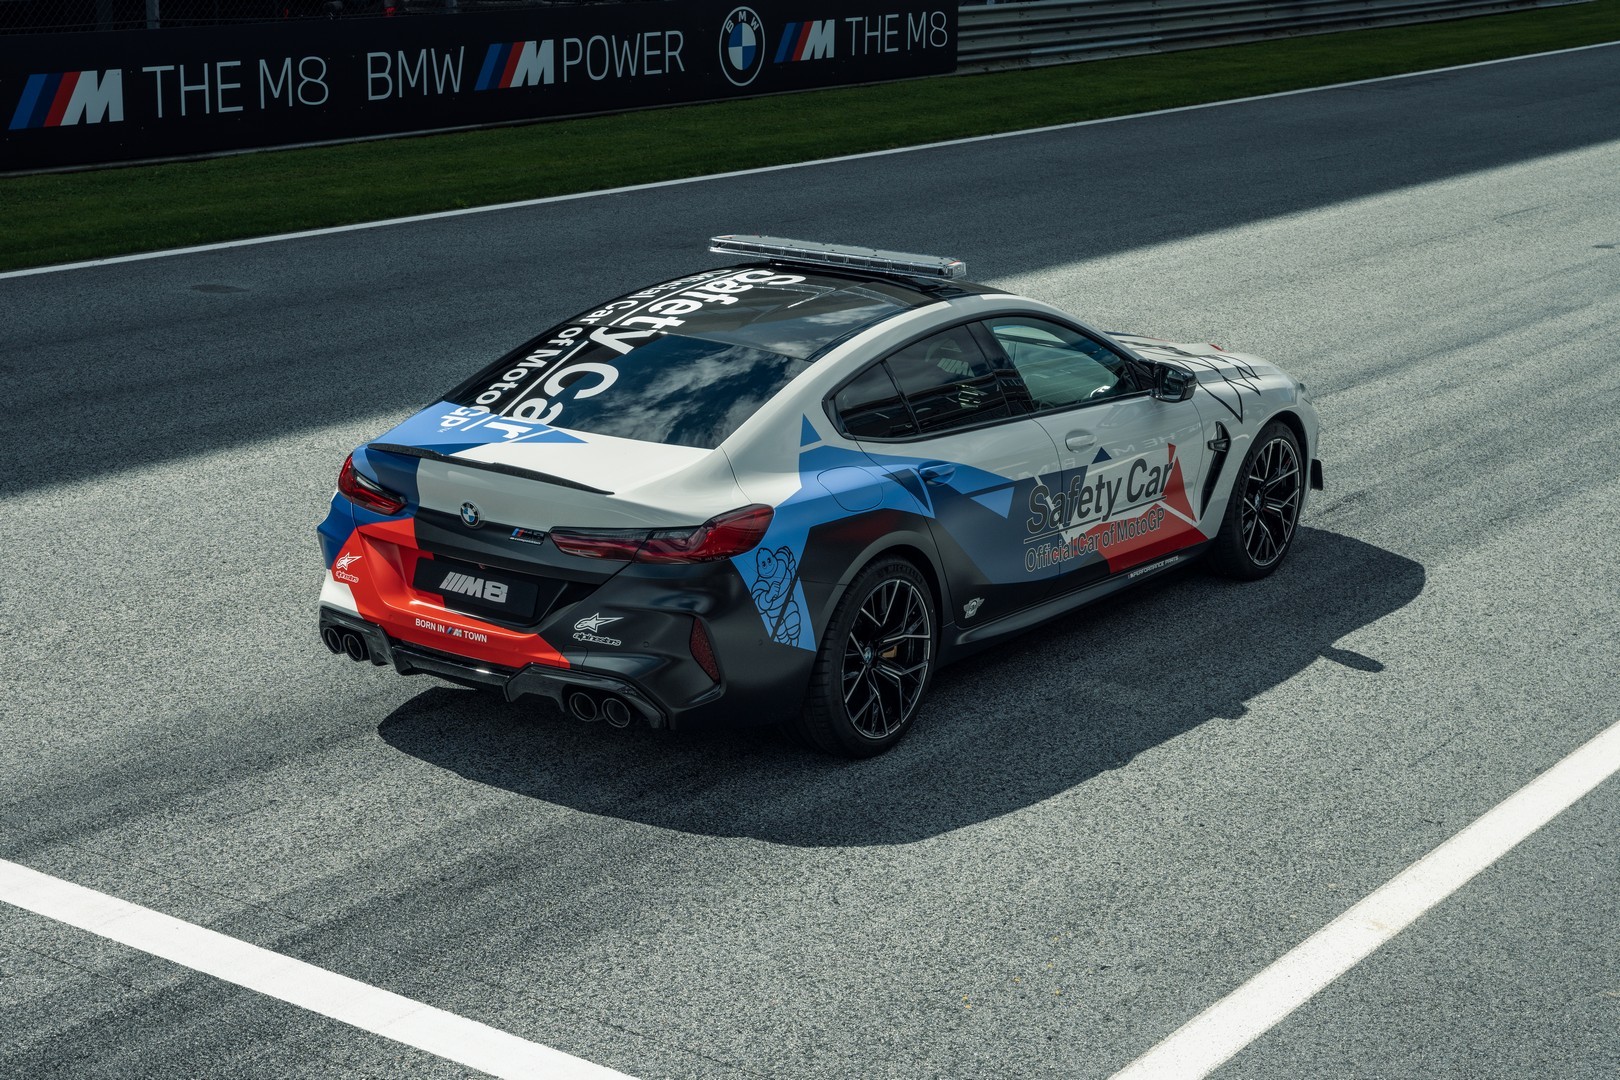 2019 - [BMW] Série 8 Gran Coupé [G16] - Page 7 Bmw-surprisingly-turned-the-new-m8-gran-coupe-into-a-safety-car-for-motogp_16